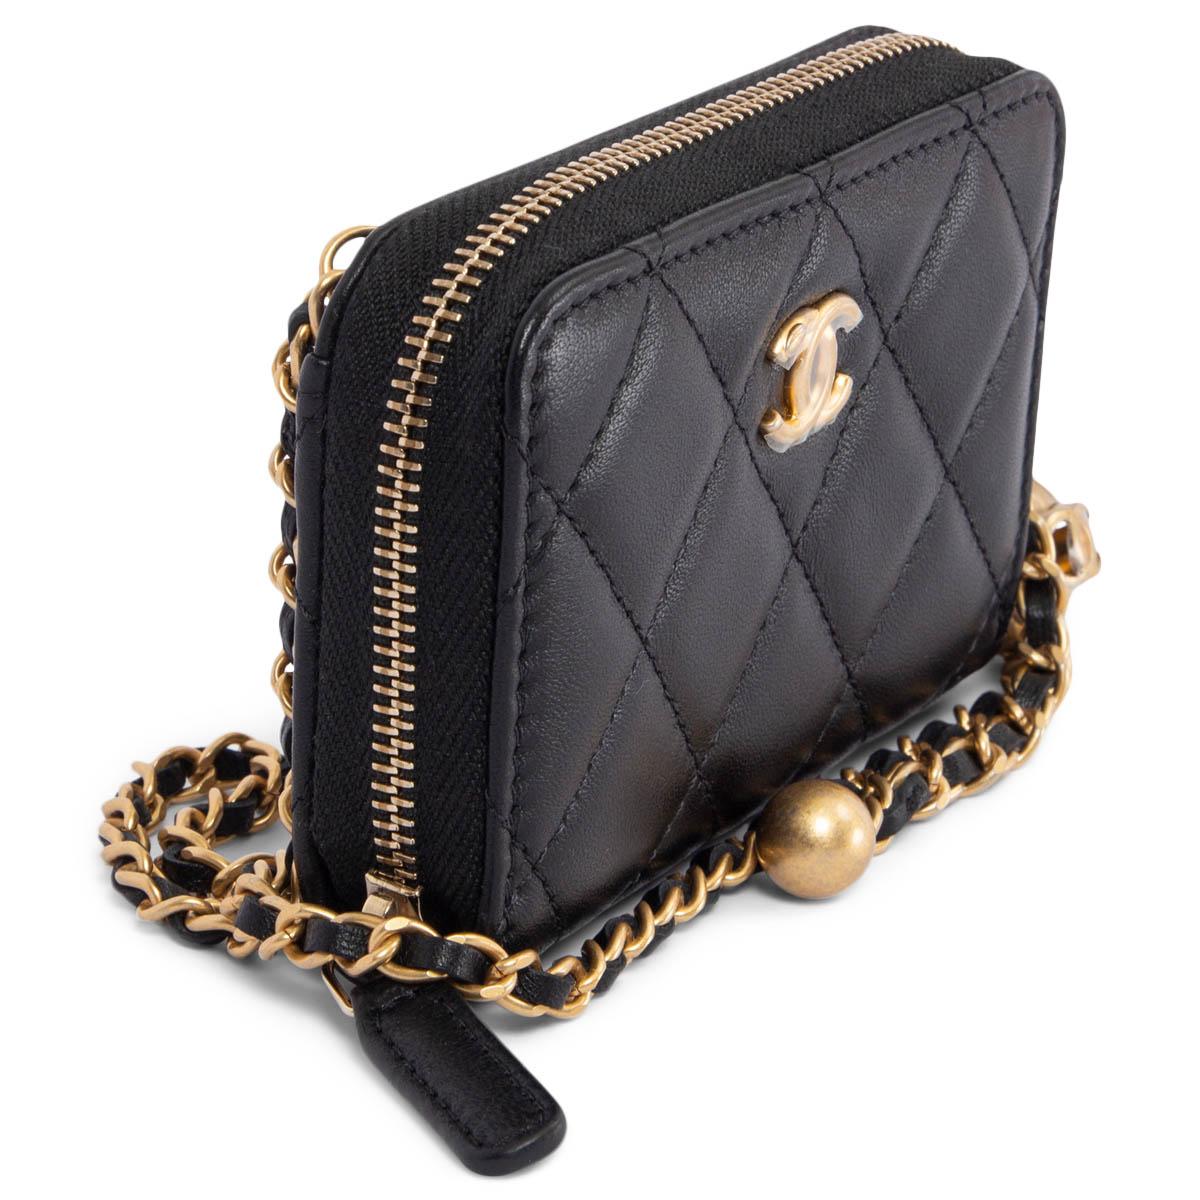 100% authentic Chanel 2022 Pearl Crush credit card crossbody wallet in black quilted calfskin with a slip pocket at the back and gold-tone hardware. Opens with a zipper on top to 3 compartements and is lind in beige grosgrain. Brand new.